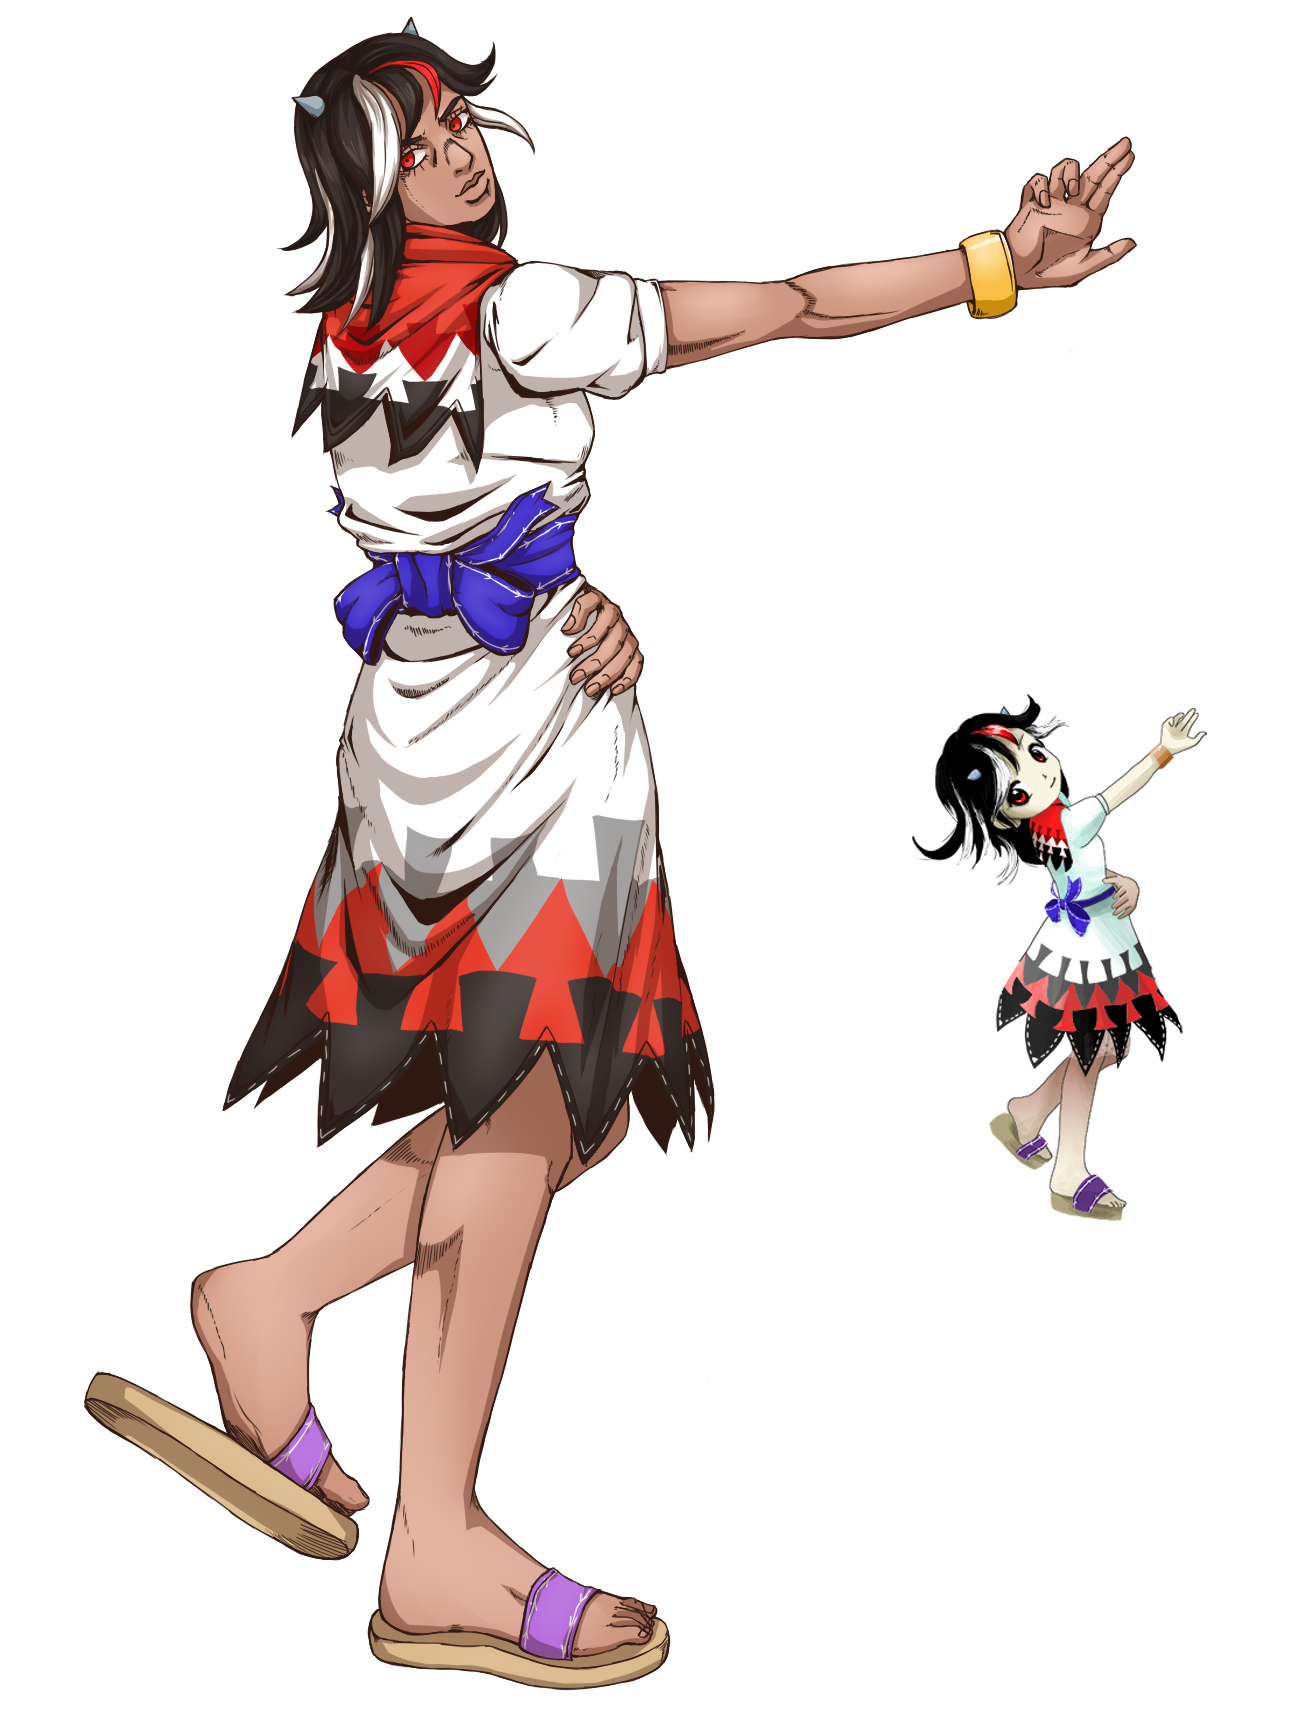 a drawing of Kijin Seija from Touhou in the style of the Jojo's Bizarre Adventure: Stone Ocean anime. Seija's sprite from Double Dealing Character is next to the drawing, very small